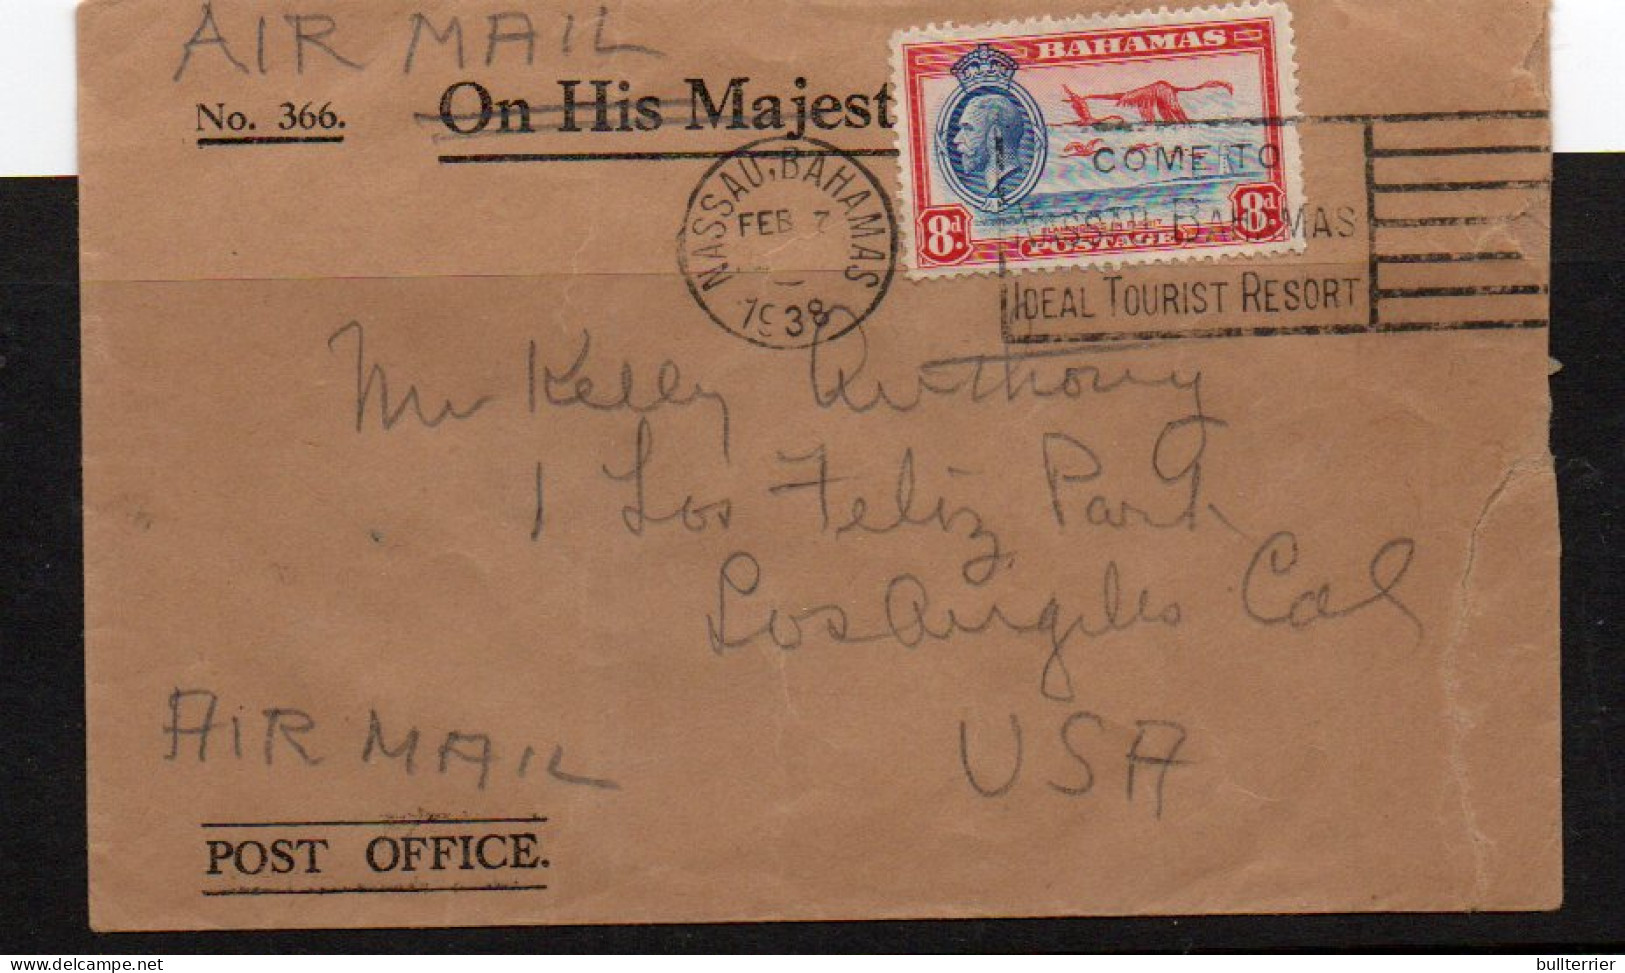 BAHAMAS - 1938 - AIRMAIL COVER TO LOS ANGLES FRANKED 8D FLAMINGO  - 1859-1963 Colonia Britannica